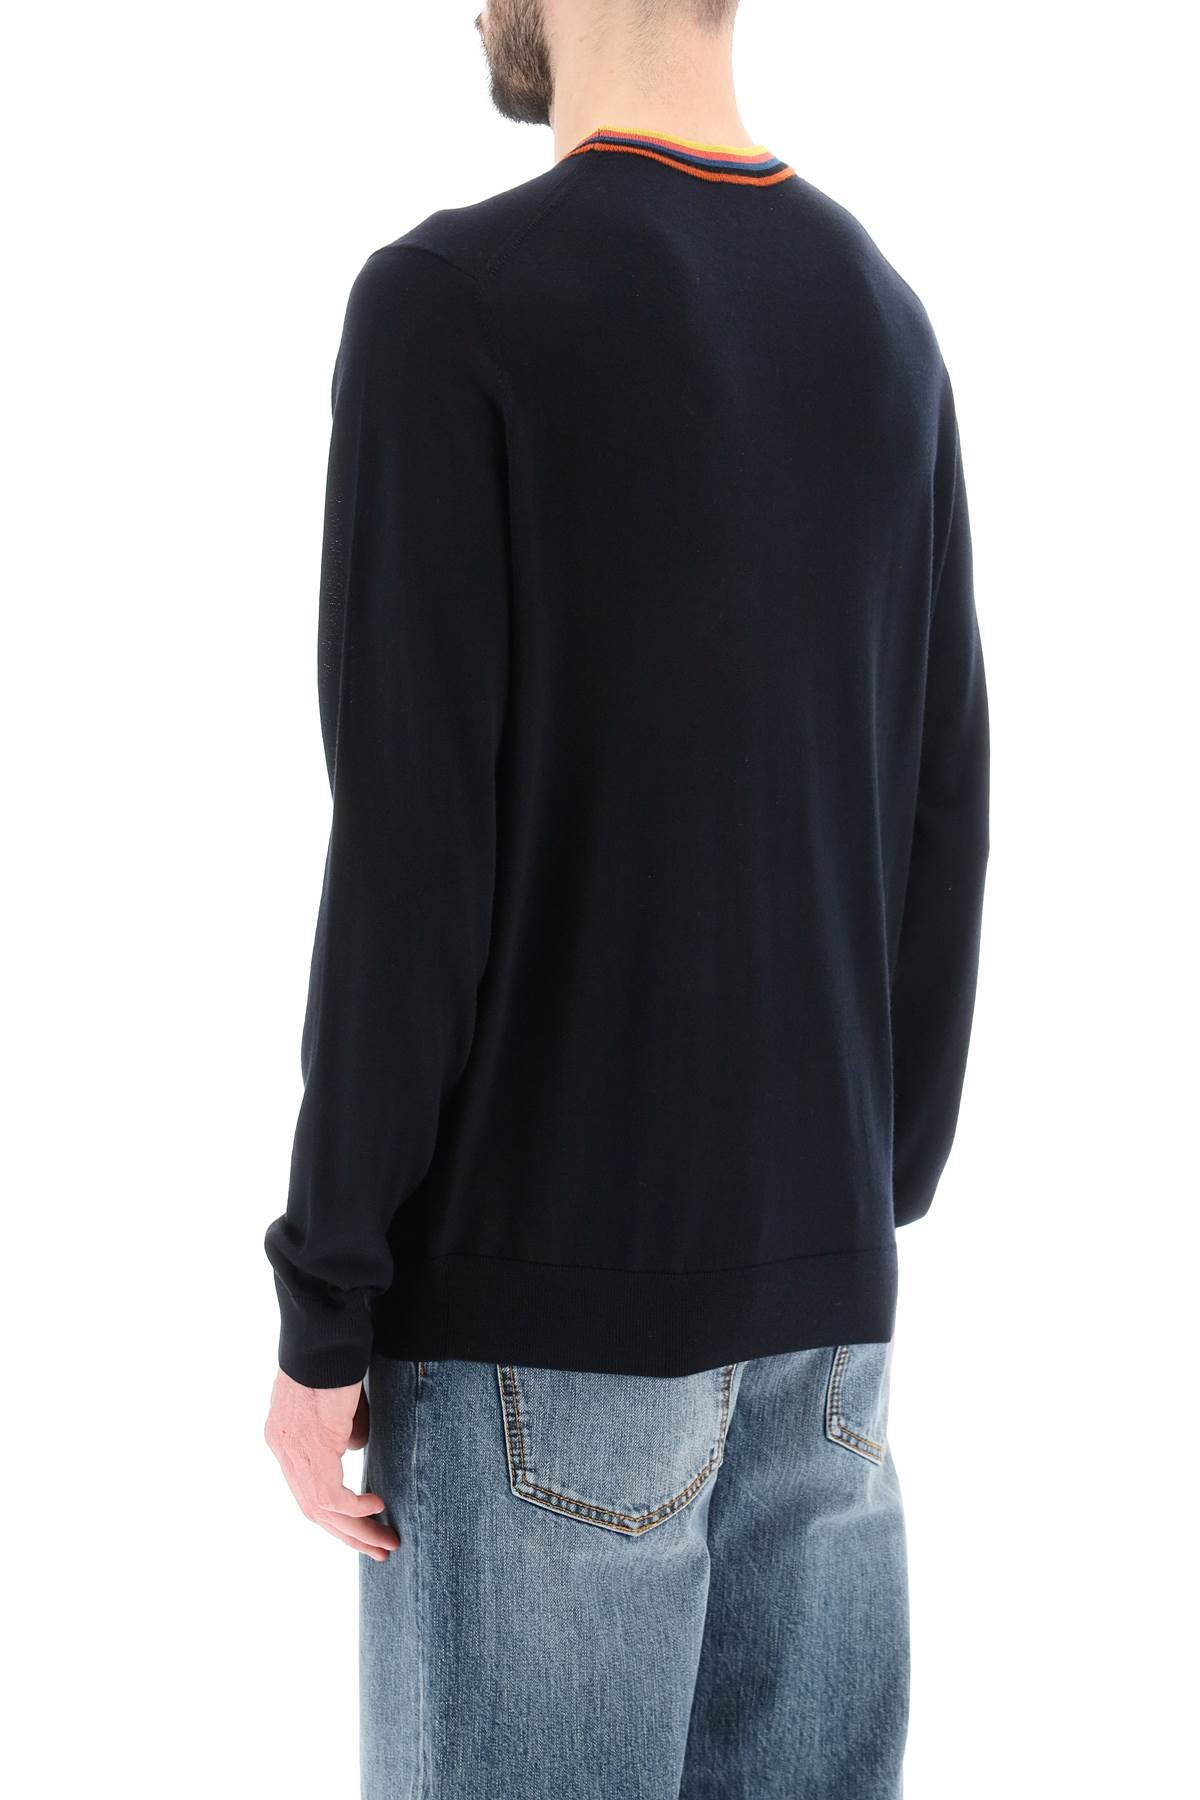 Paul smith merino wool sweater with tricolour detail